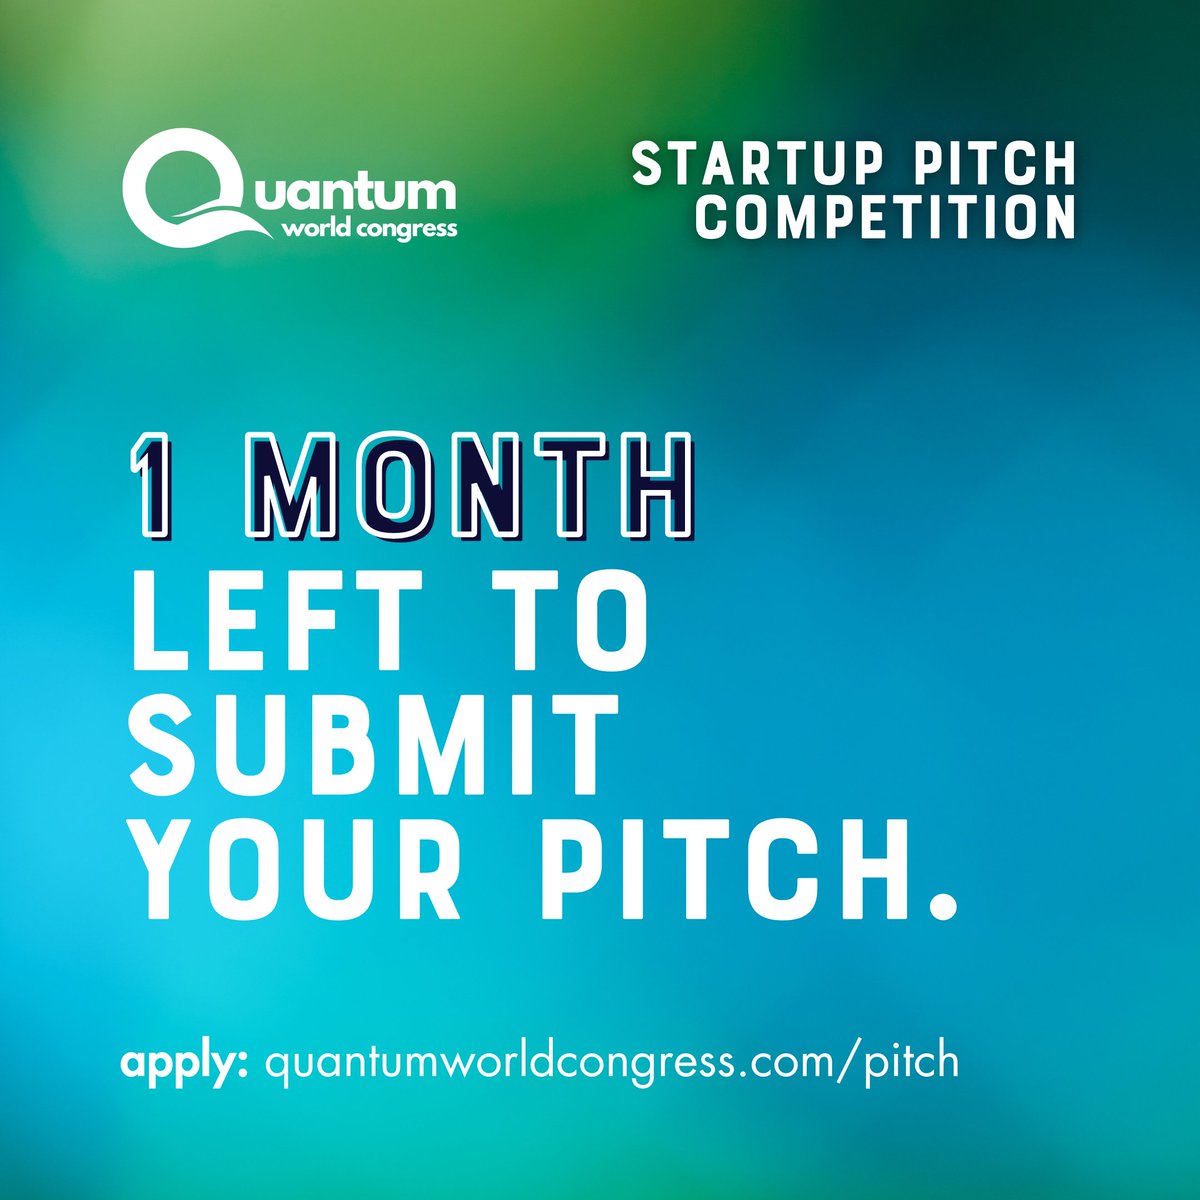 1 month left to submit your pitch for the #QWC2024 Startup Pitch Competition! Here's everything you need to know to apply: quantumworldcongress.com/pitch 

#QWC2024 #QuantumWorldCongress #Quantum #QuantumTech #QuantumConvergence #QuantumTechnology #QuantumAI